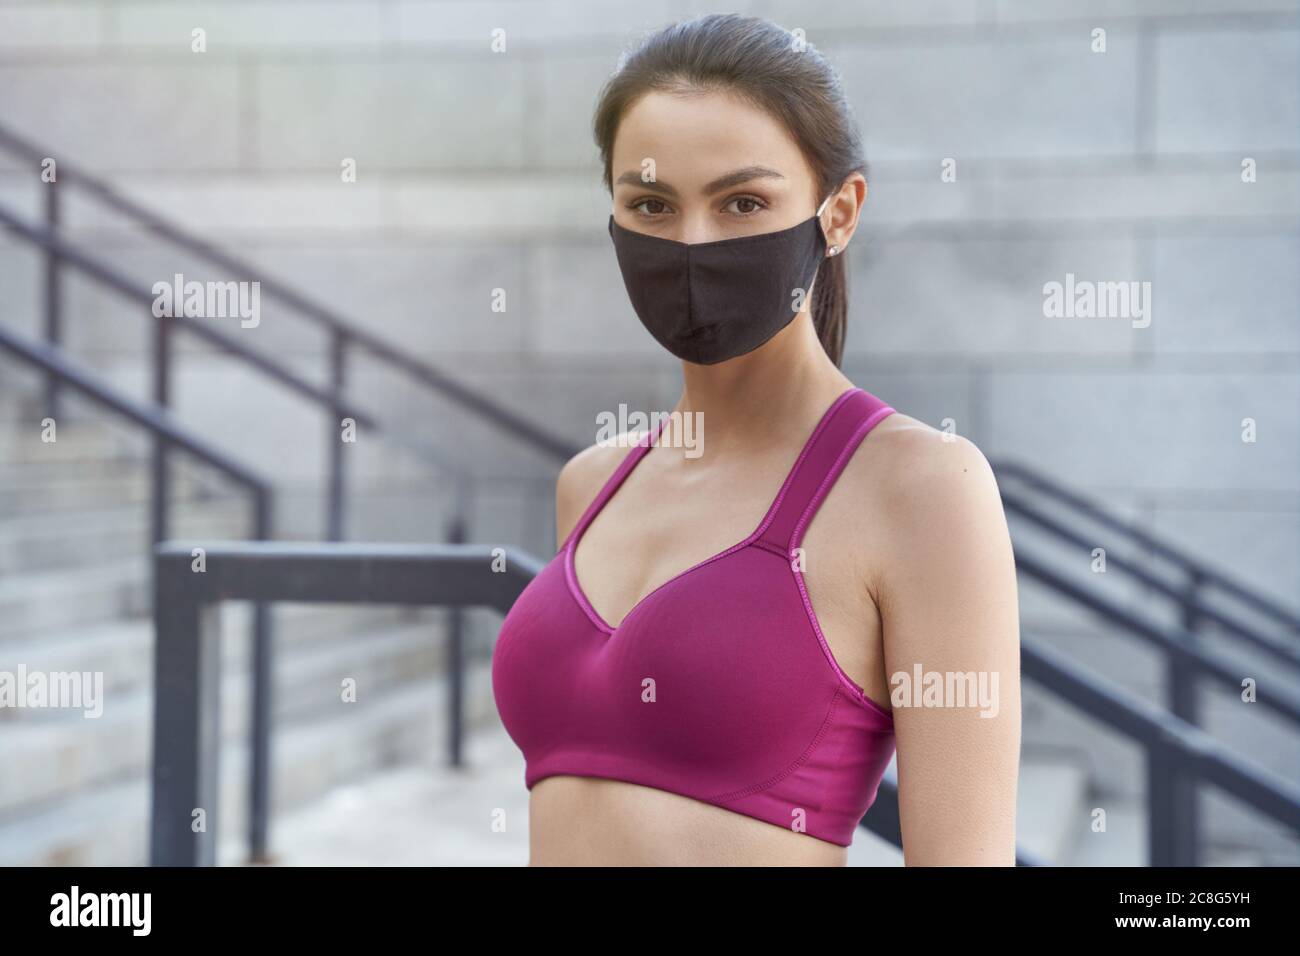 Young Fitness Sport Woman Running And She Wears A Mask For